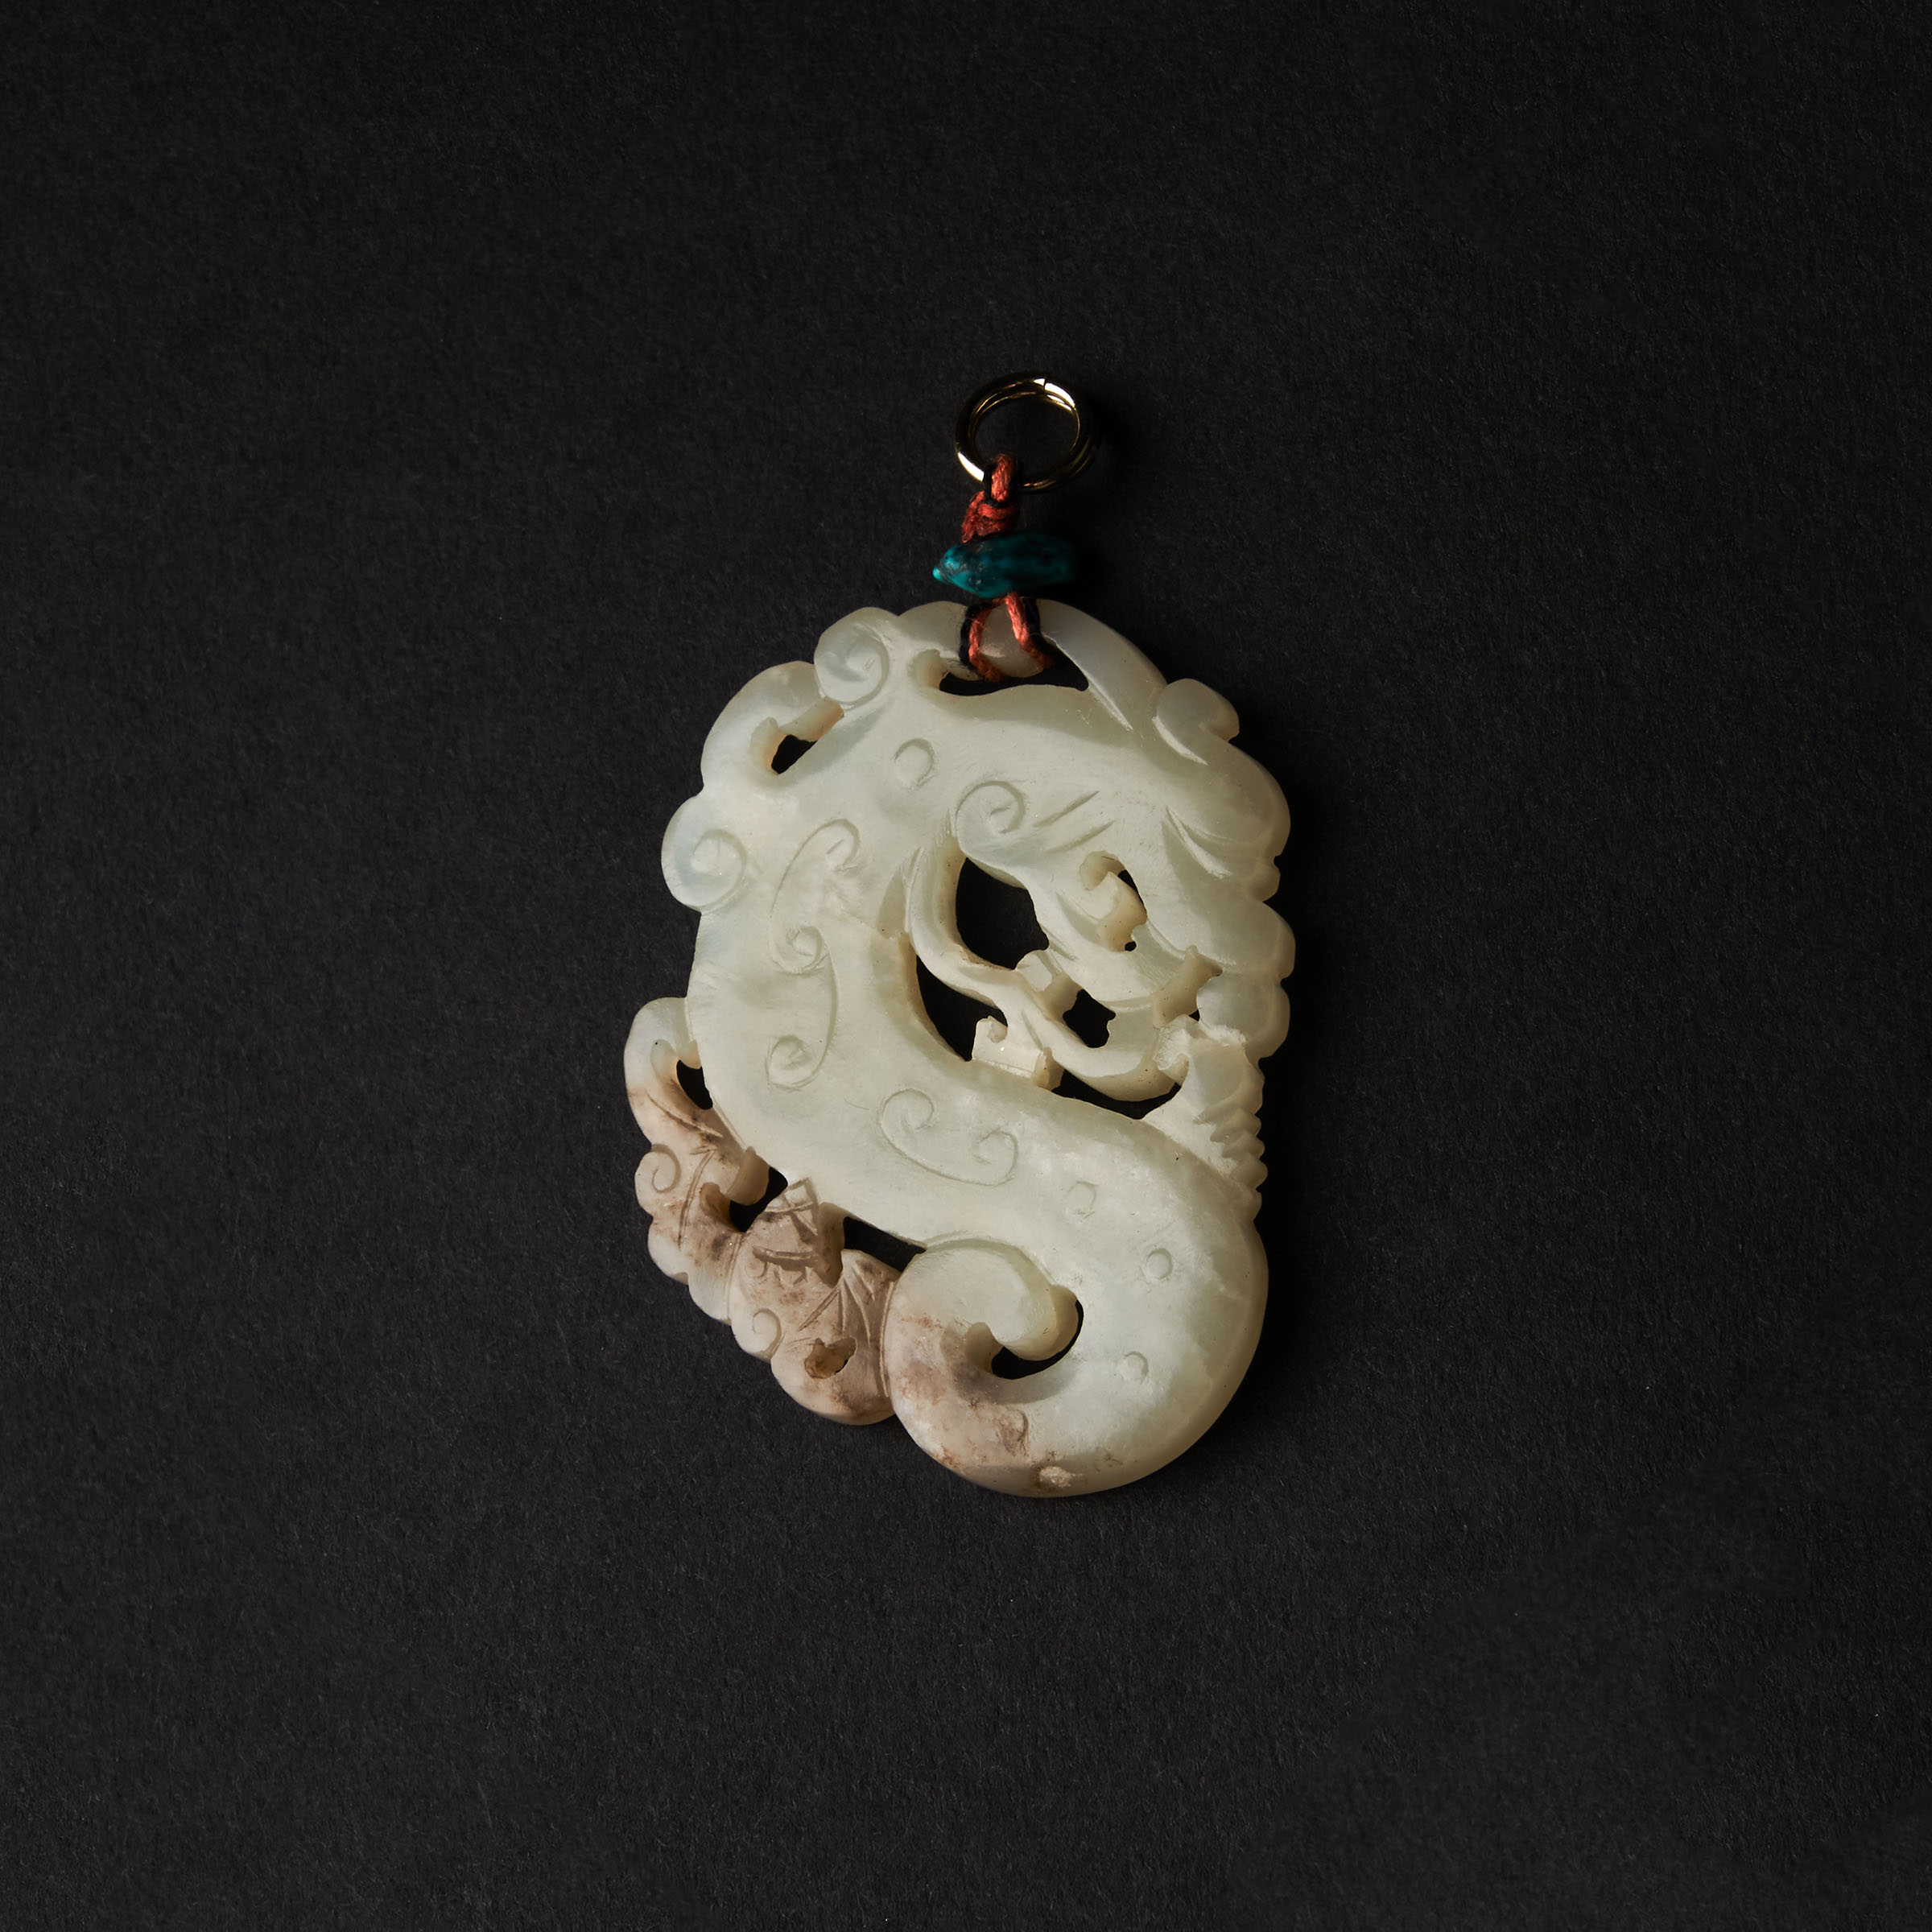 A White Jade 'Dragon and Bat' Pendant, Late Ming/Early Qing Dynasty, 16th/17th Century